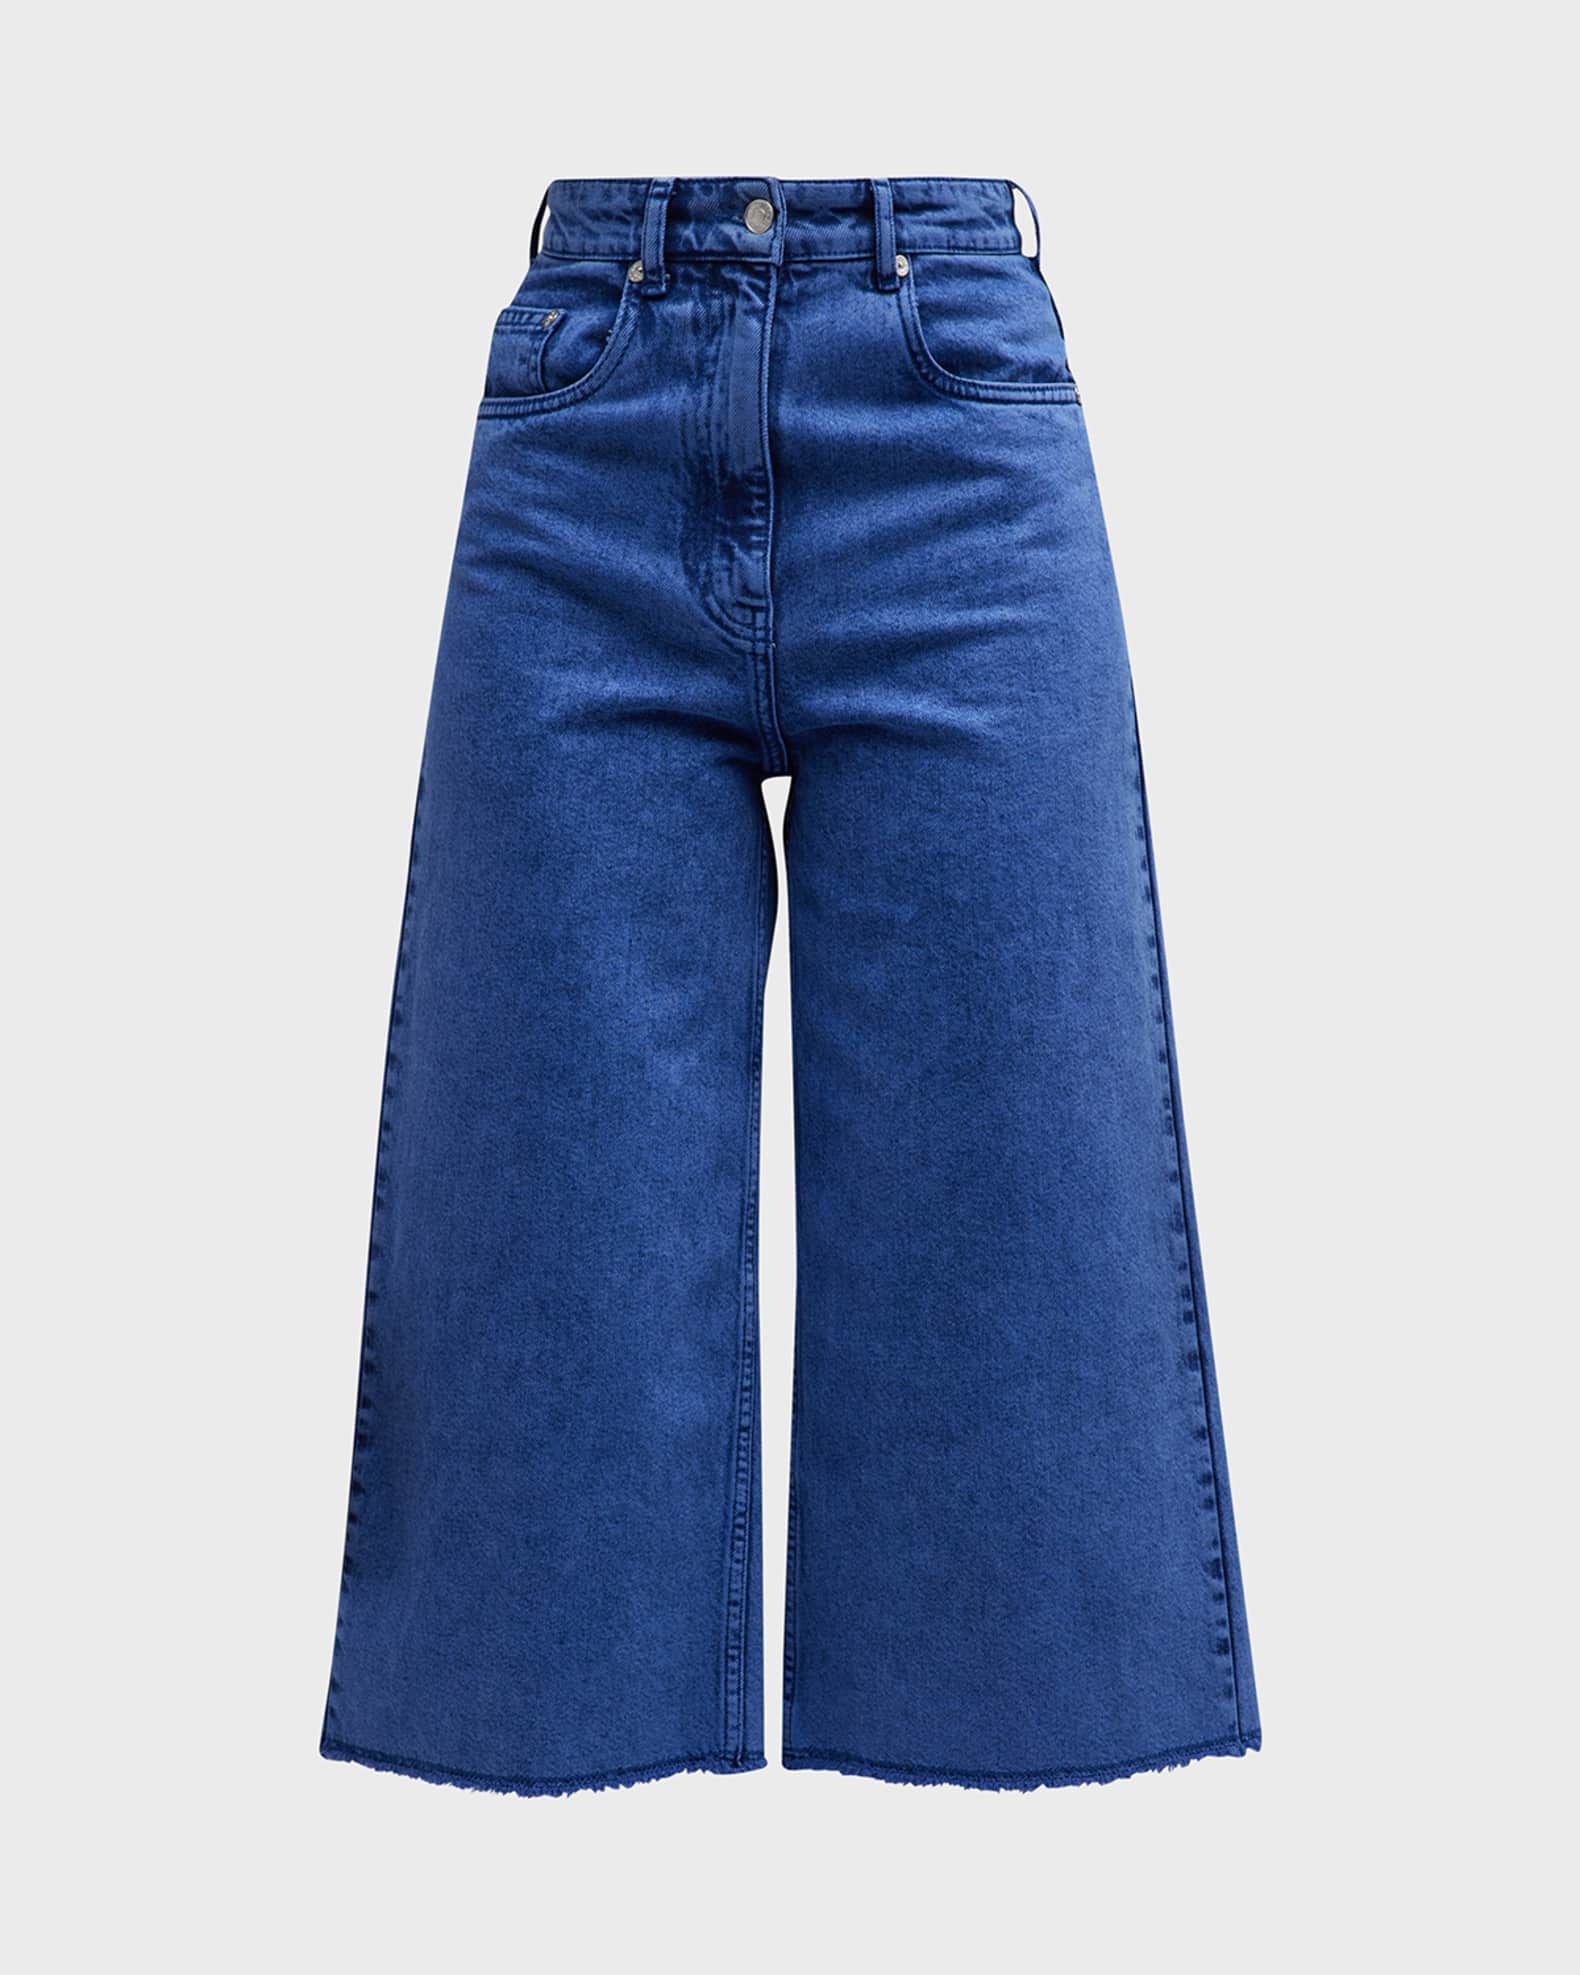 Moschino Jeans Recycled Denim Culotte Cropped Pants | Neiman Marcus